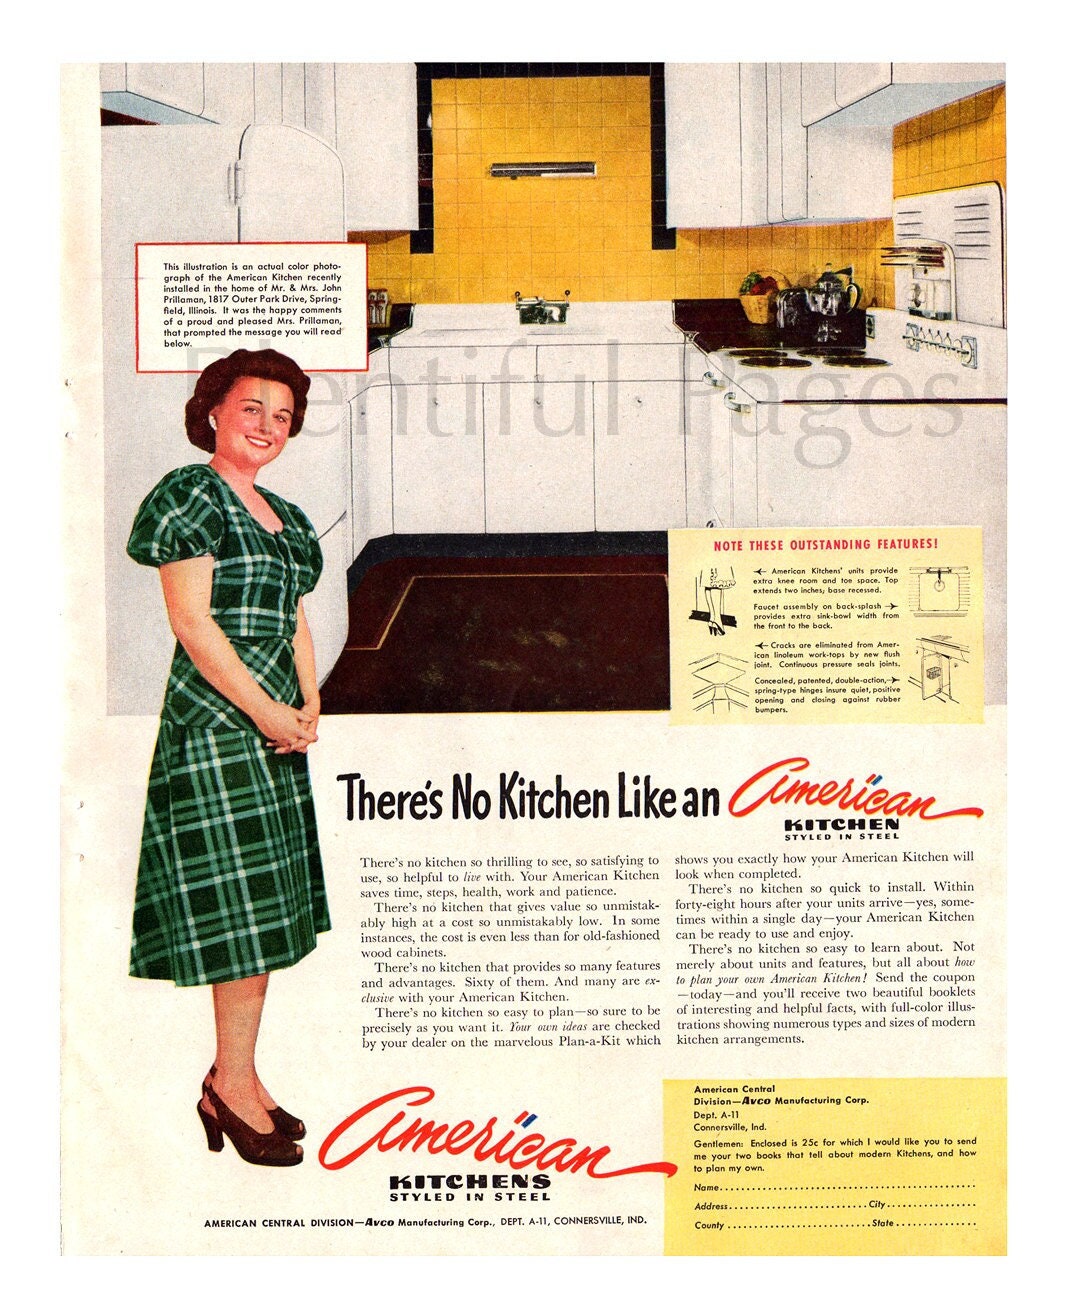 1947 American Kitchens Vintage Ad 1940s Housewife pic